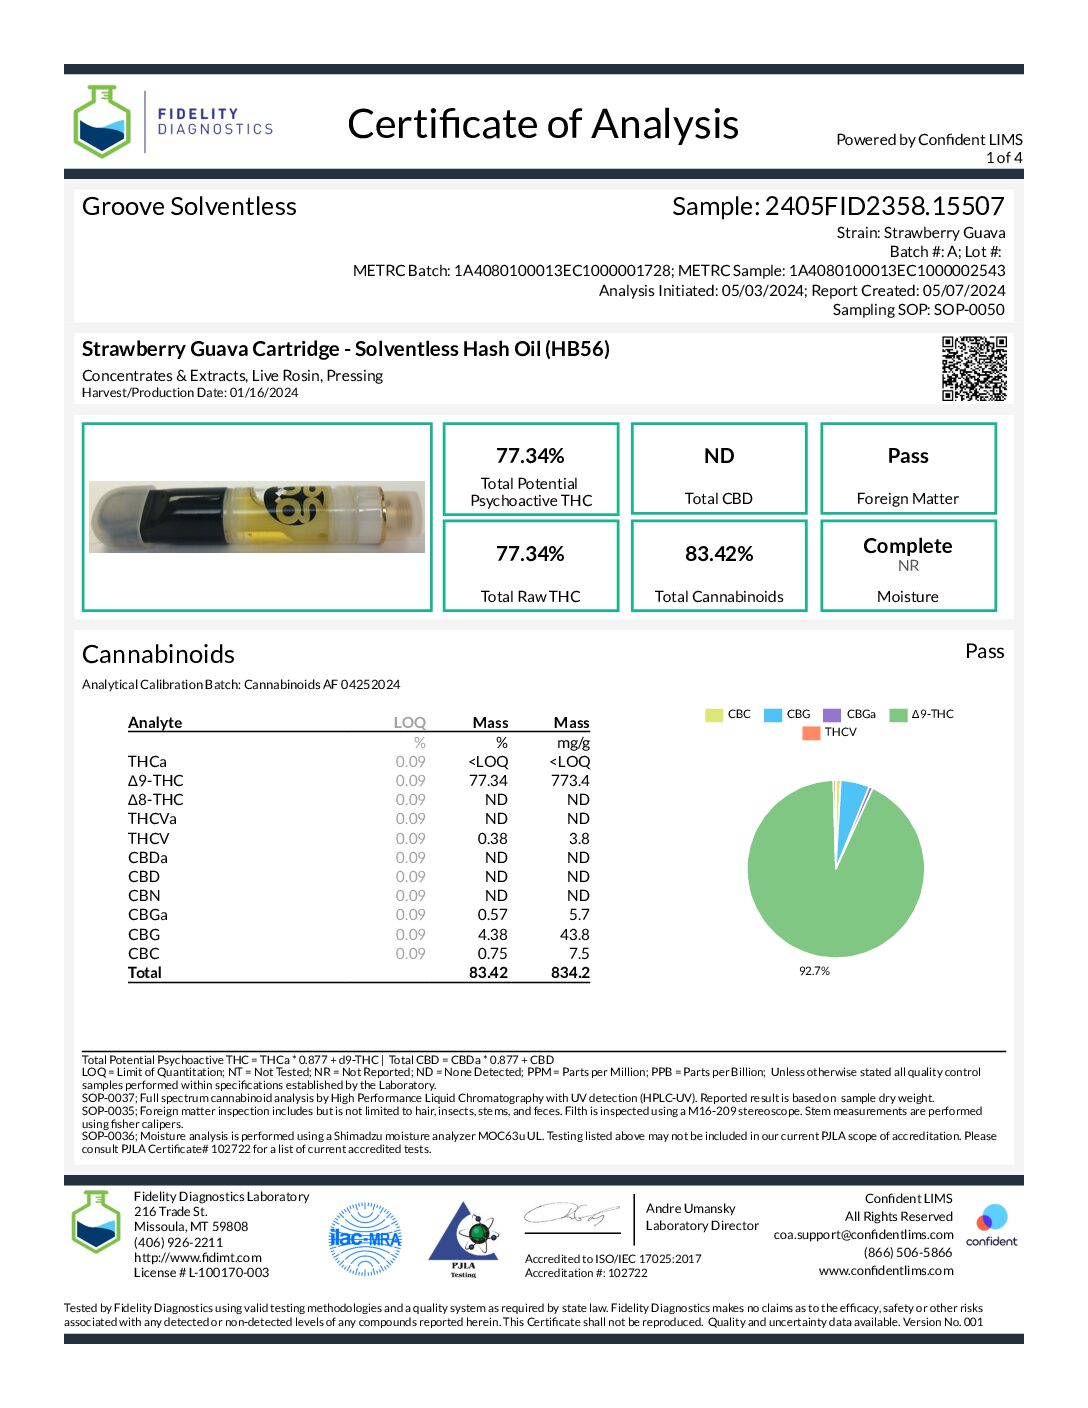 https://groovesolventless.com/wp-content/uploads/2024/05/Strawberry-Guava-Cartridge-Solventless-Hash-Oil-HB56-1-pdf.jpg